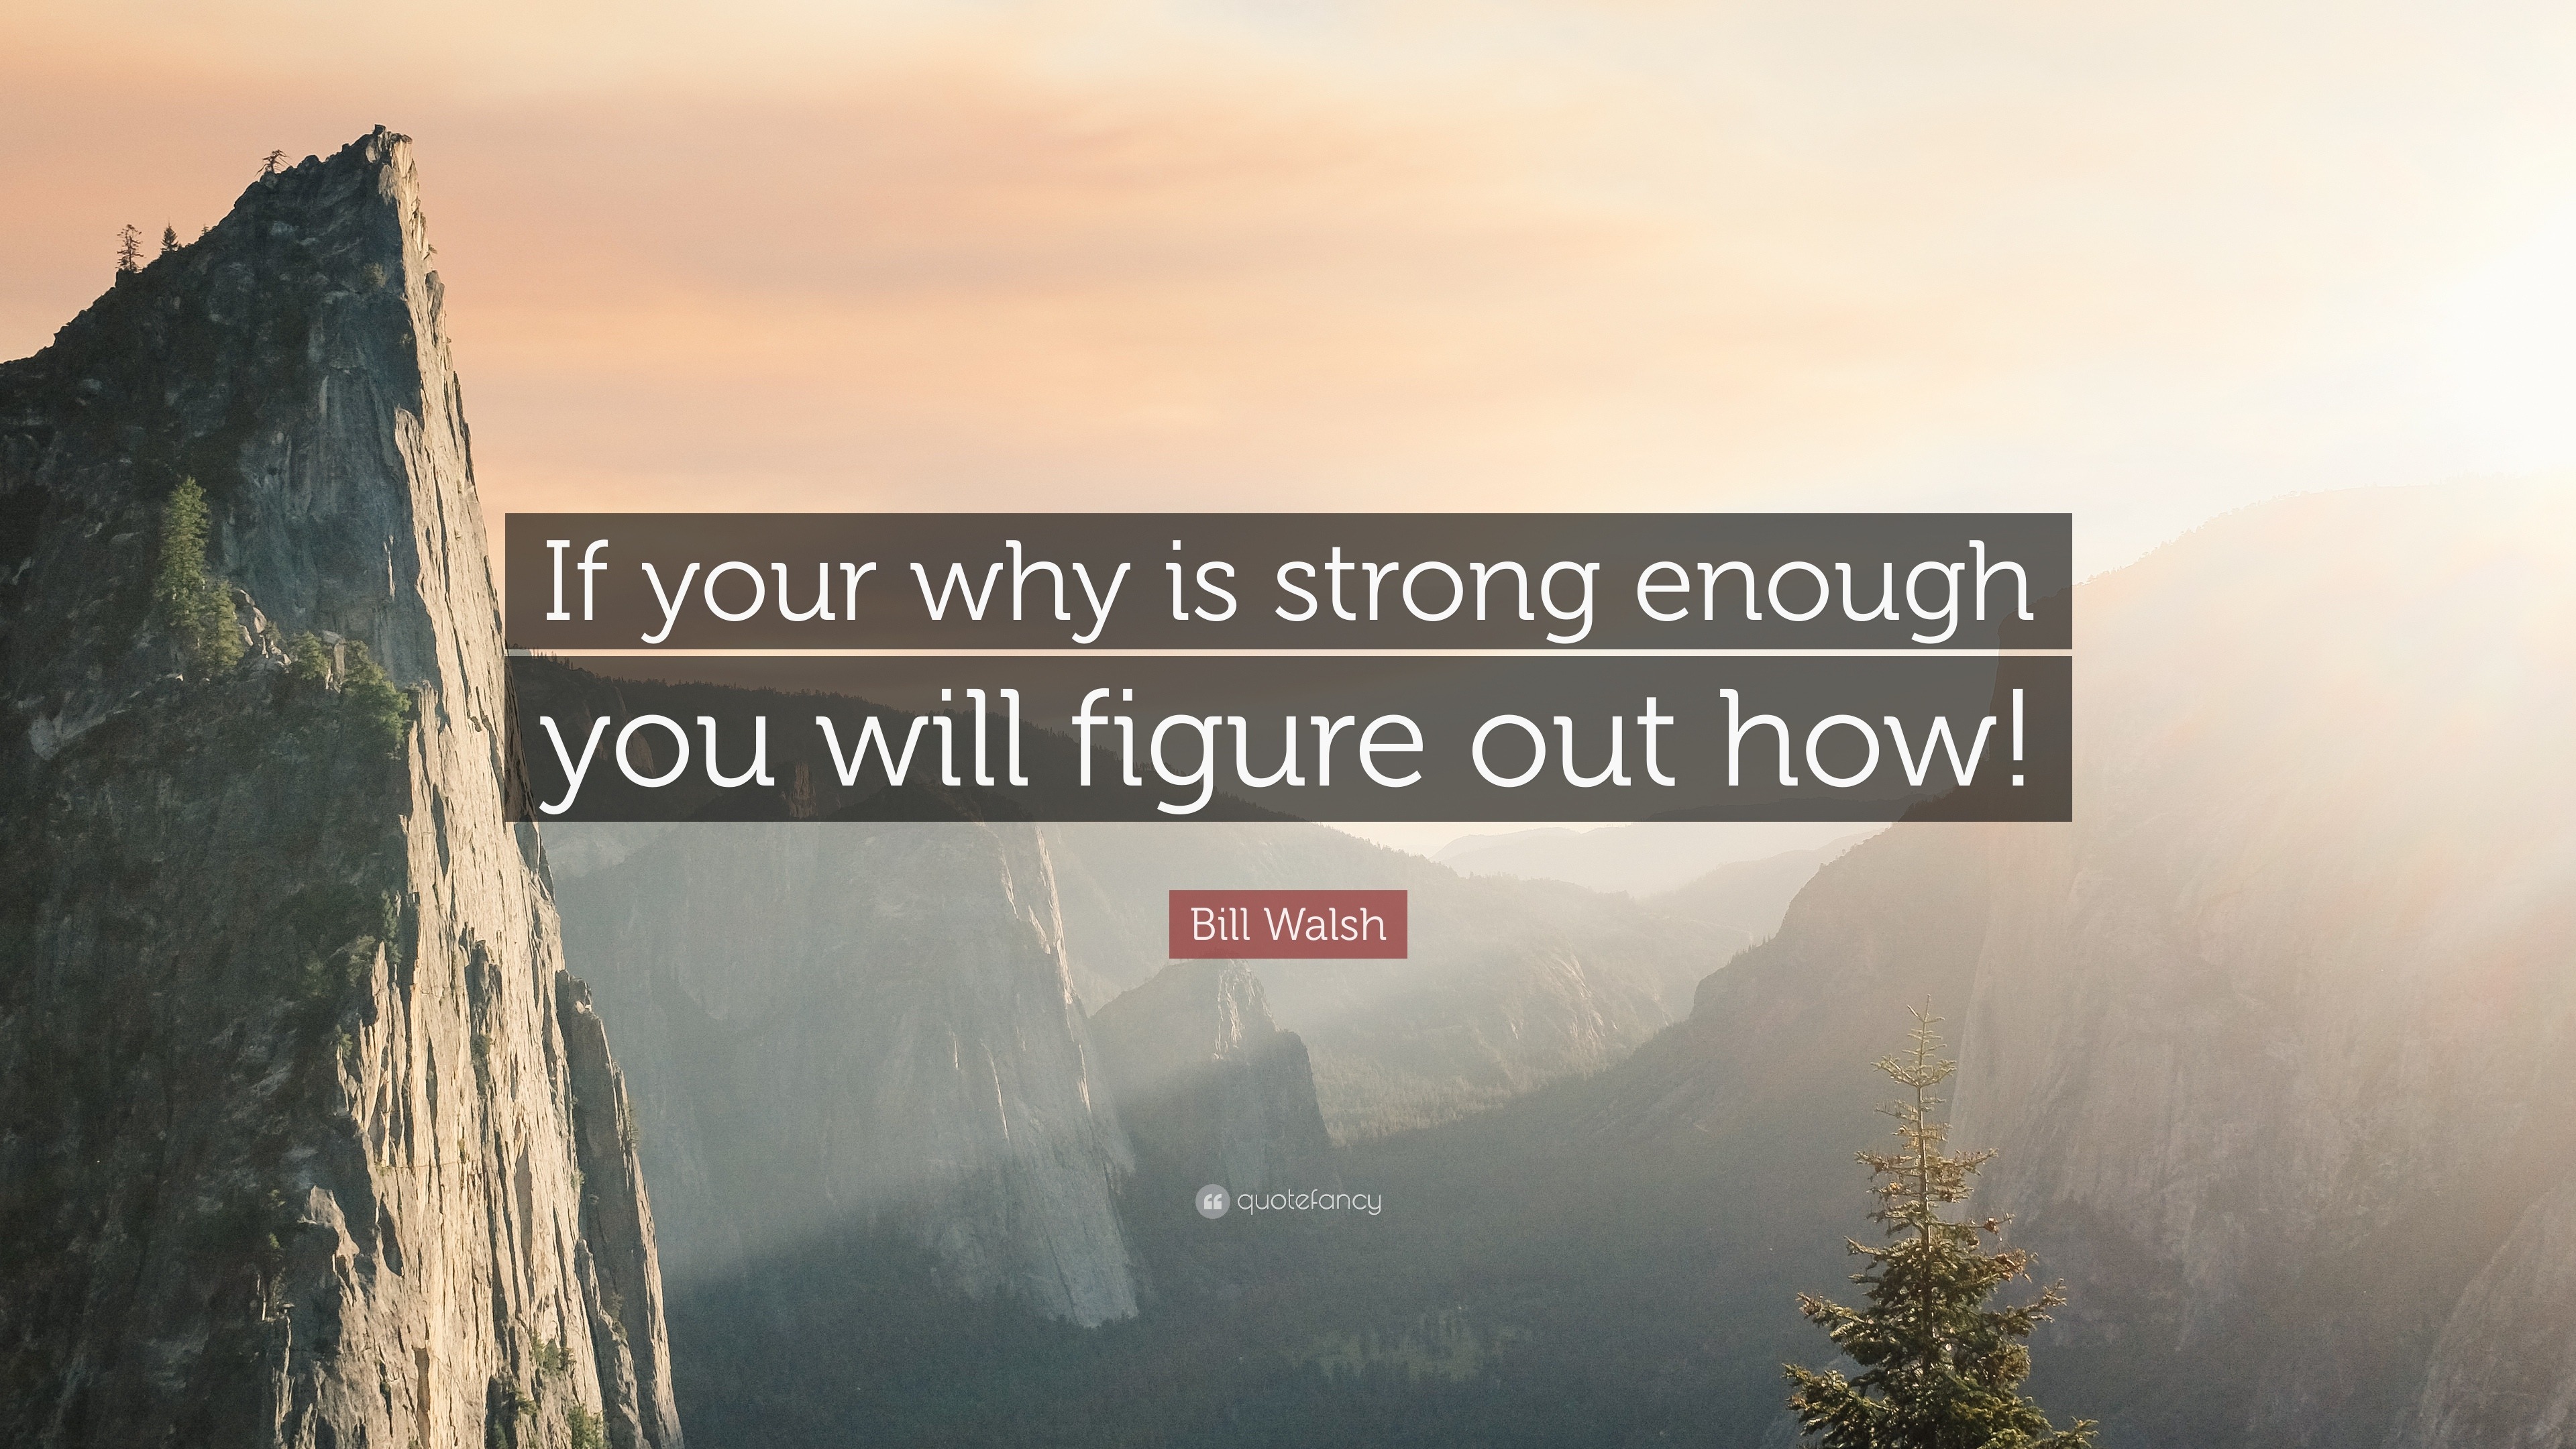 Bill Walsh Quote “If your why is strong enough you will